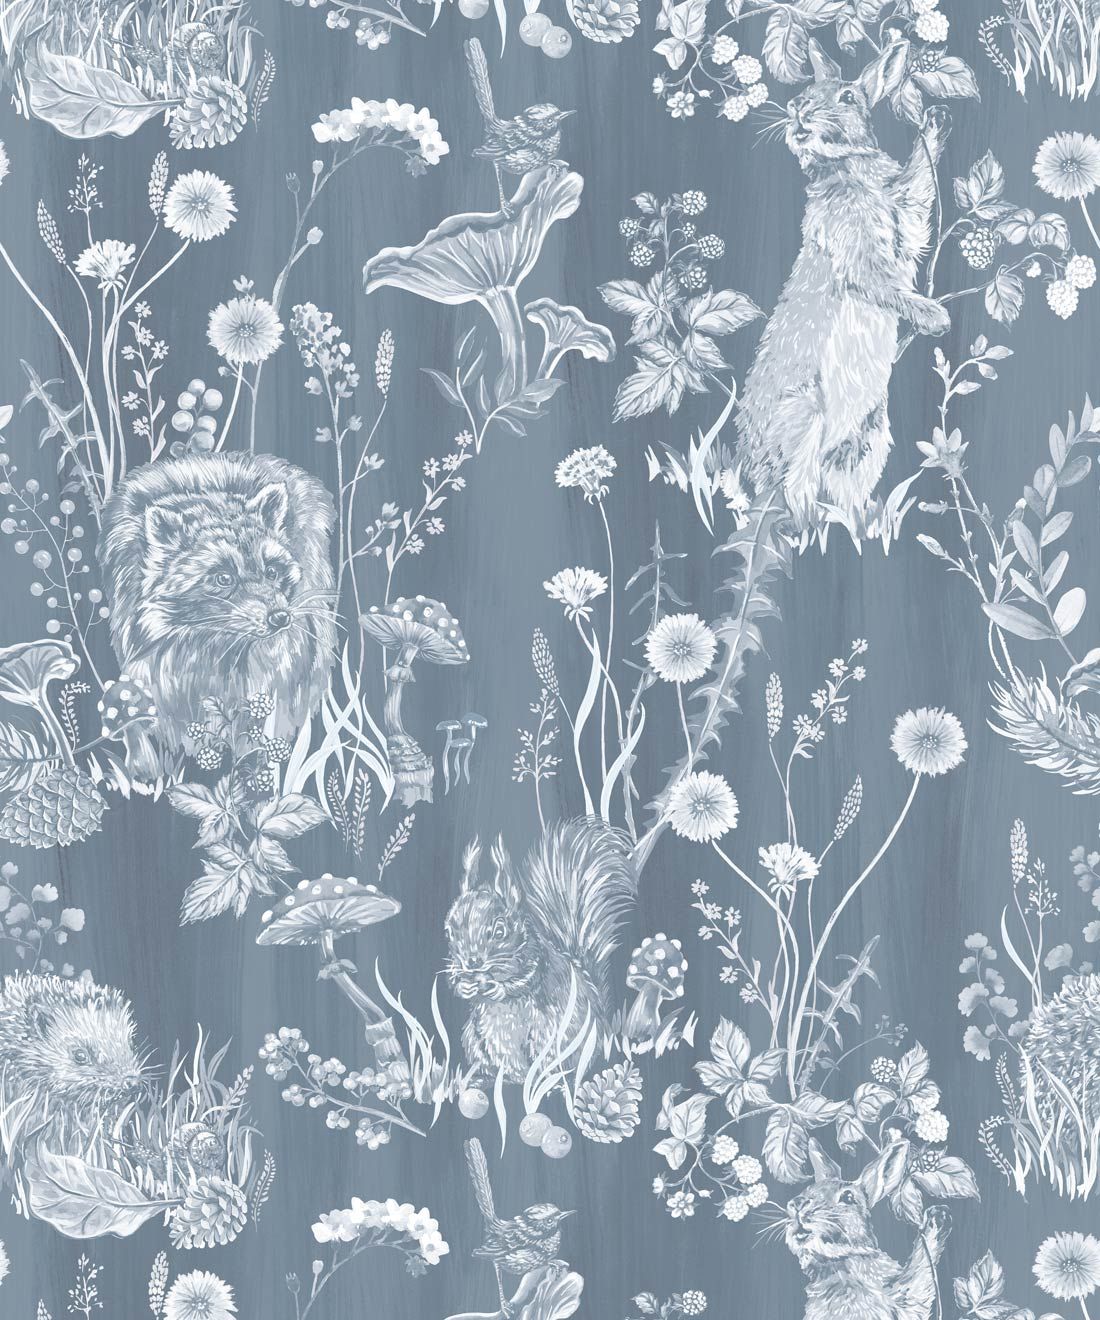 Woodland Friends Wallpaper • painted animal • Forest Wallpaper with rabbits, hares, raccoons • Iryna Ruggeri • Arctic • Swatch